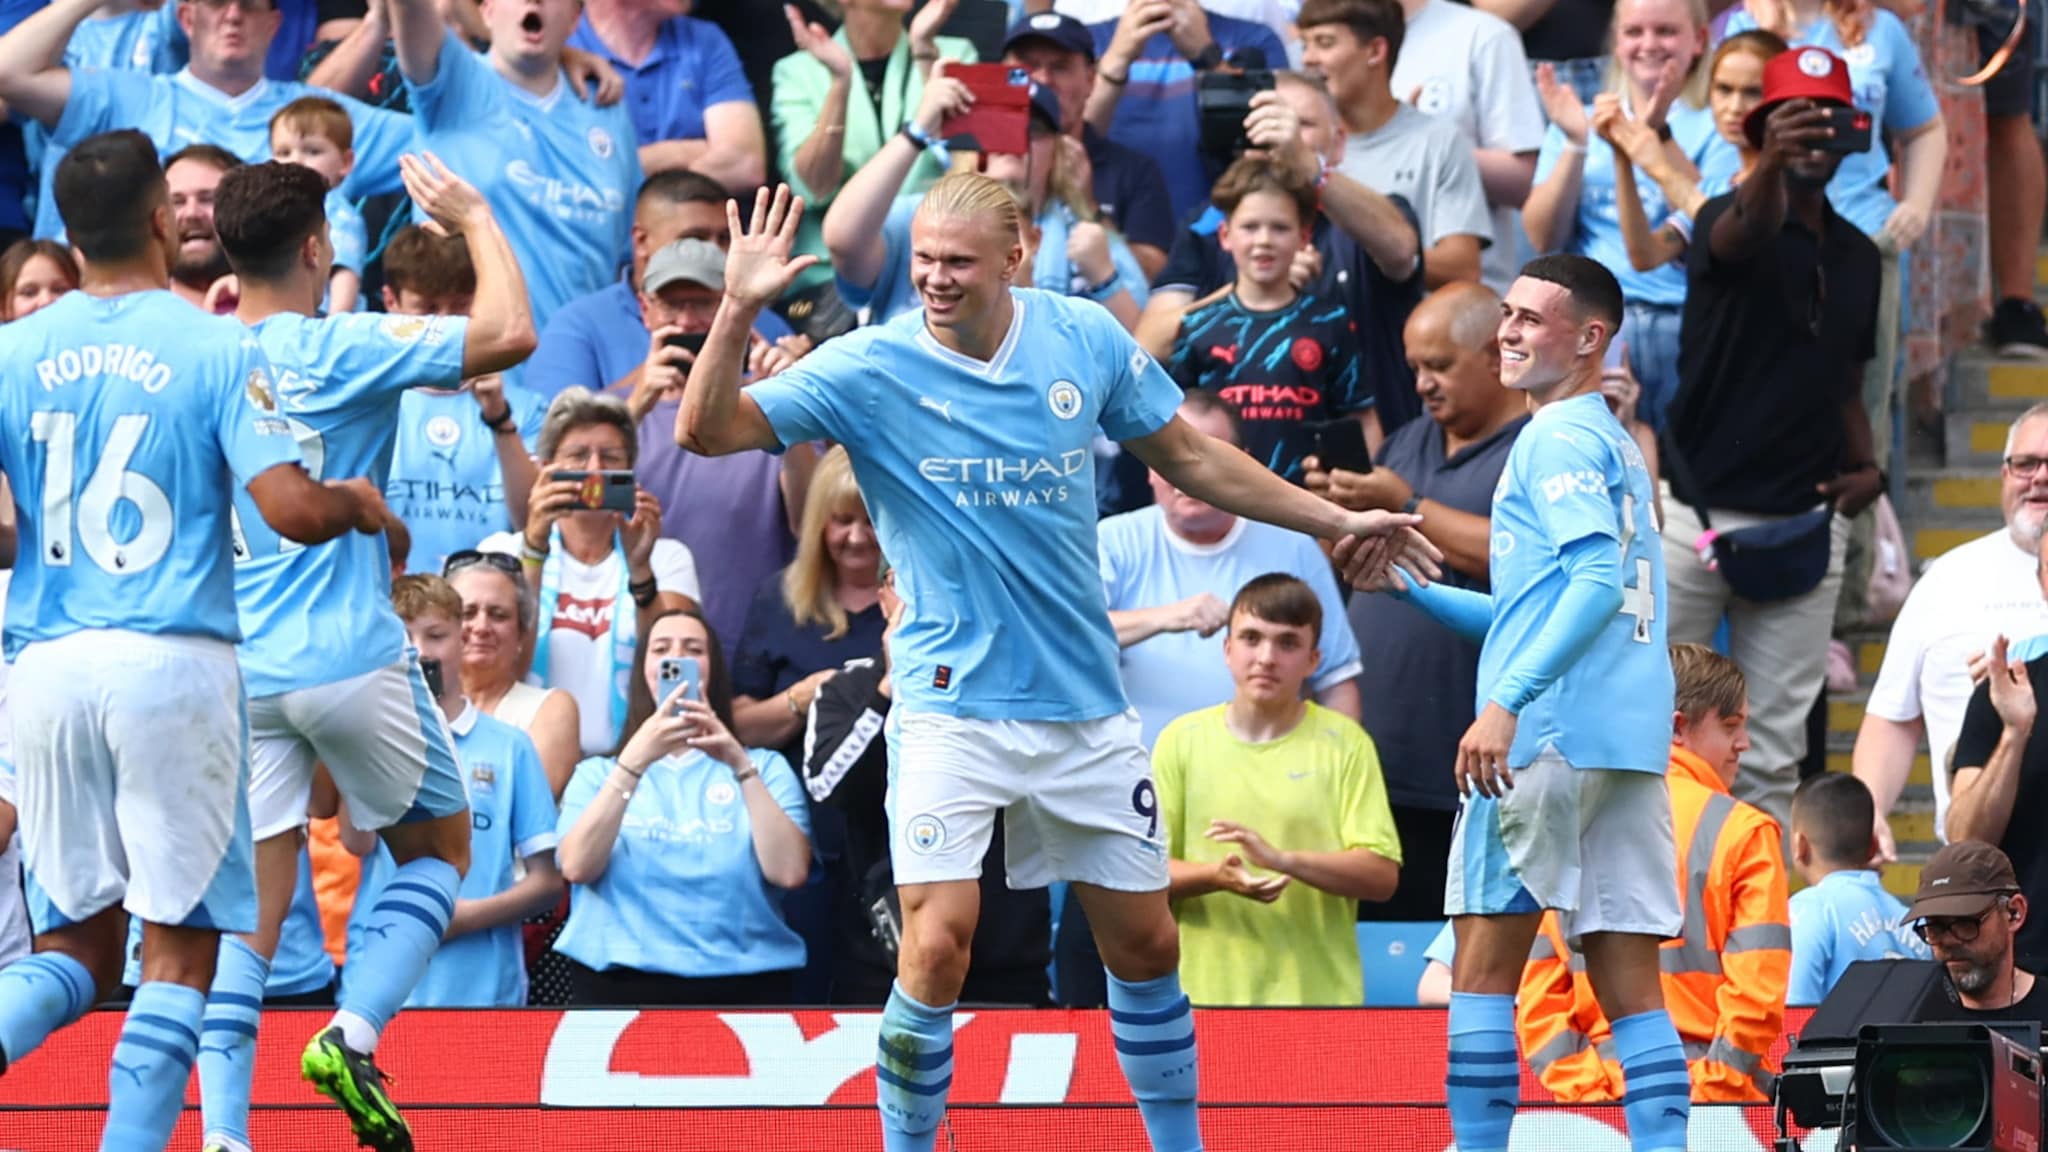 Erling Braut Haaland wreaked havoc at Manchester City against Fulham: he scored twice and ended his home drought